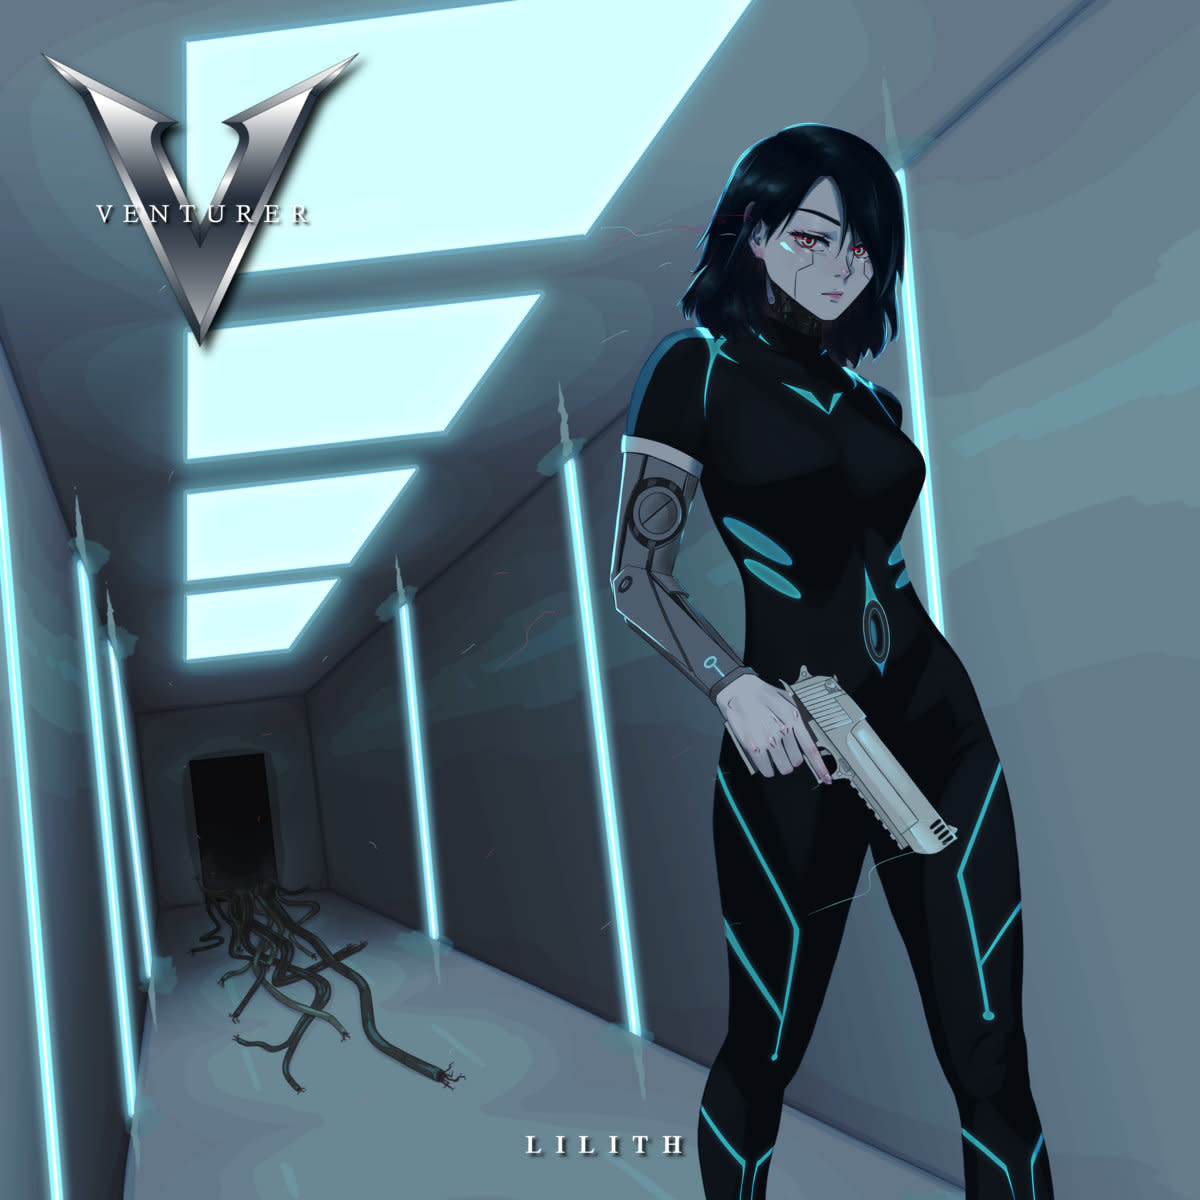 cyberpunk-ep-review-lilith-by-venturer